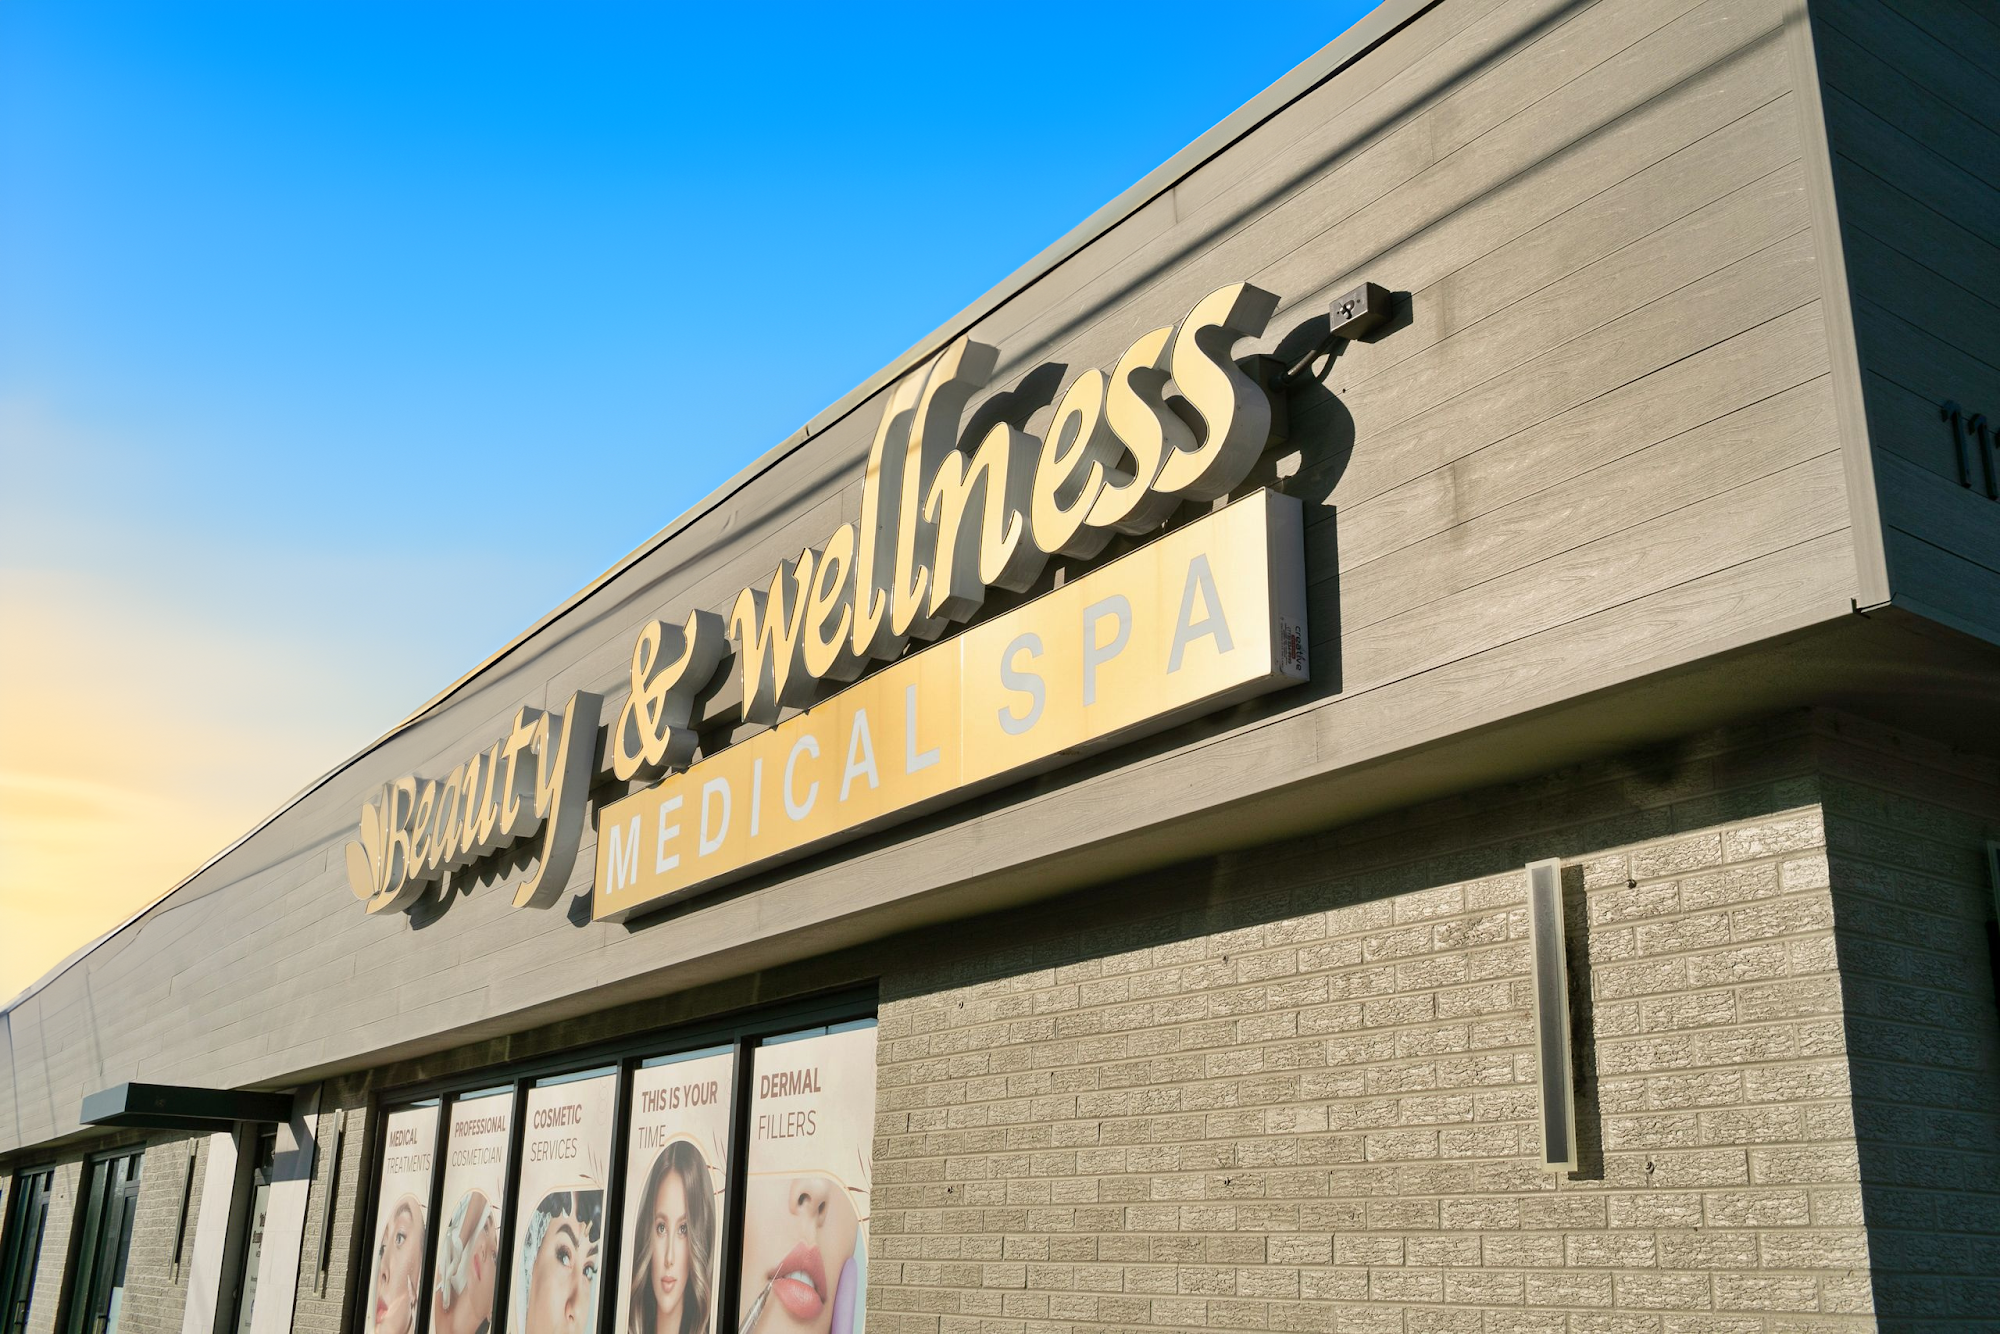 Beauty and Wellness Medical Spa 11164 SW Hwy B, Palos Hills Illinois 60465